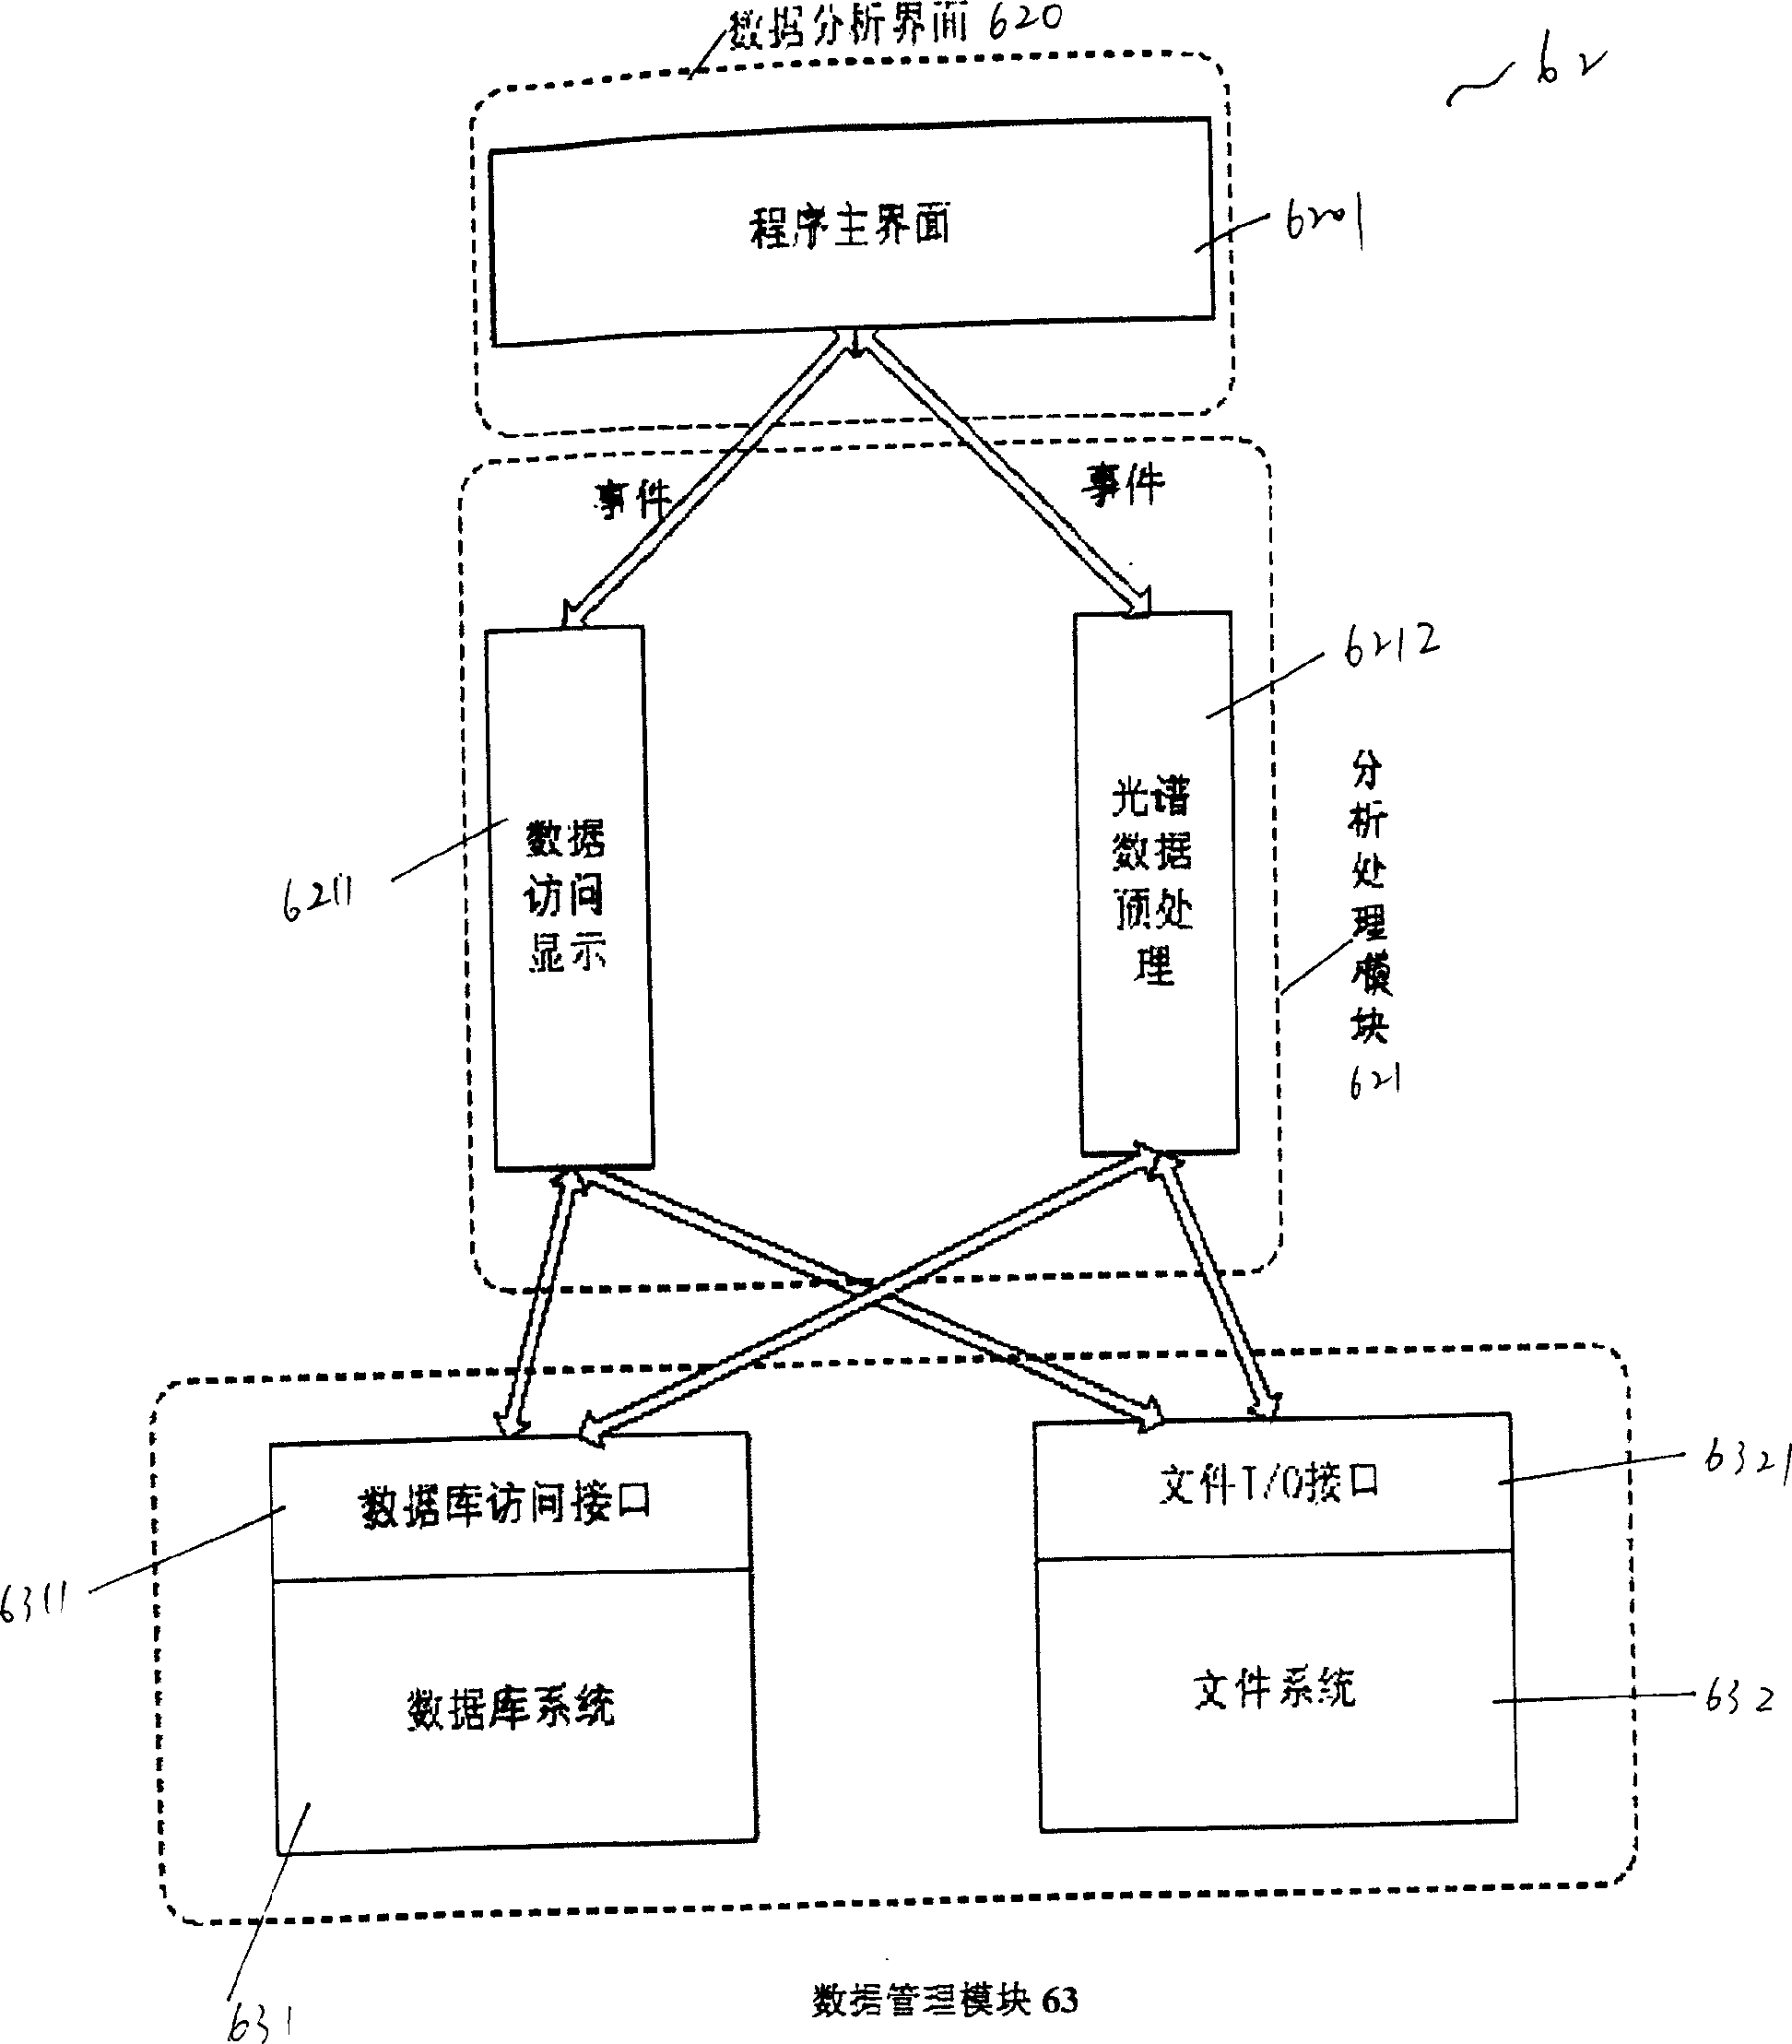 Object spectrum and multicomponent object information collecting apparatus and synchronization acquisition treatment system